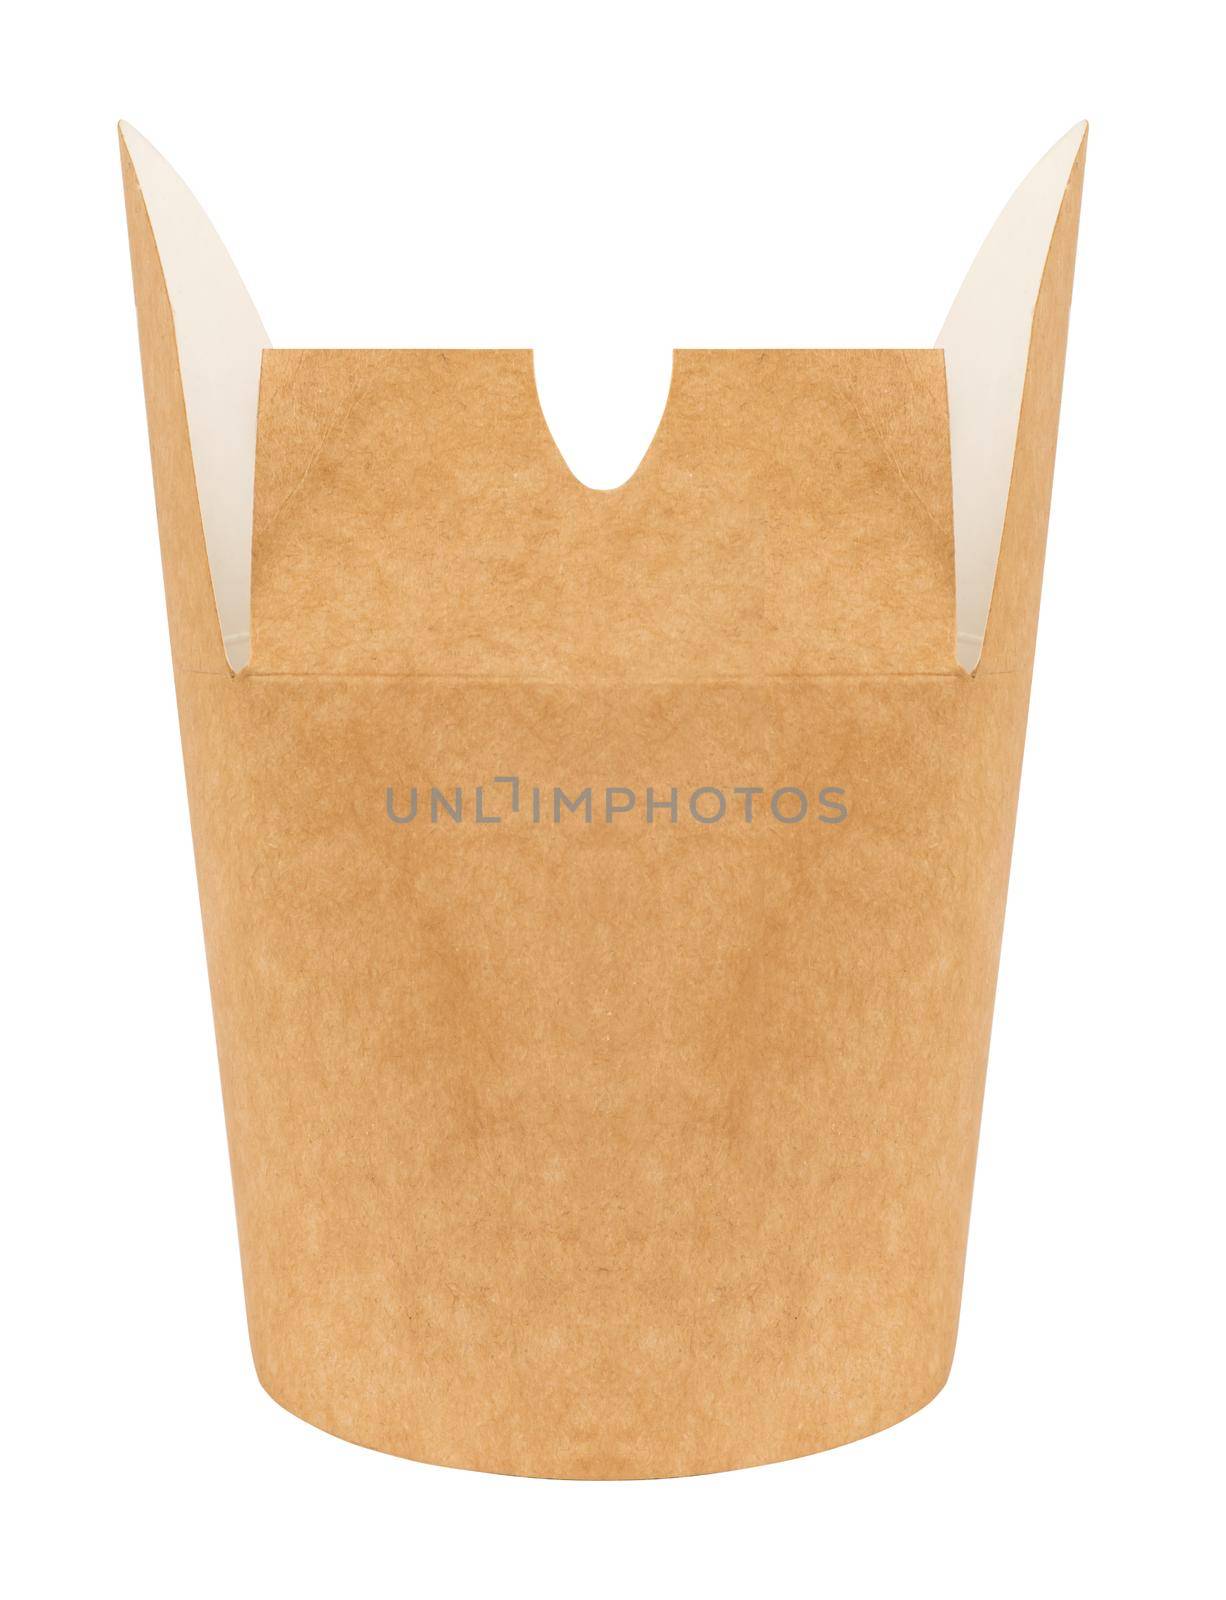 disposable paper packaging, for food, on a white background in isolation